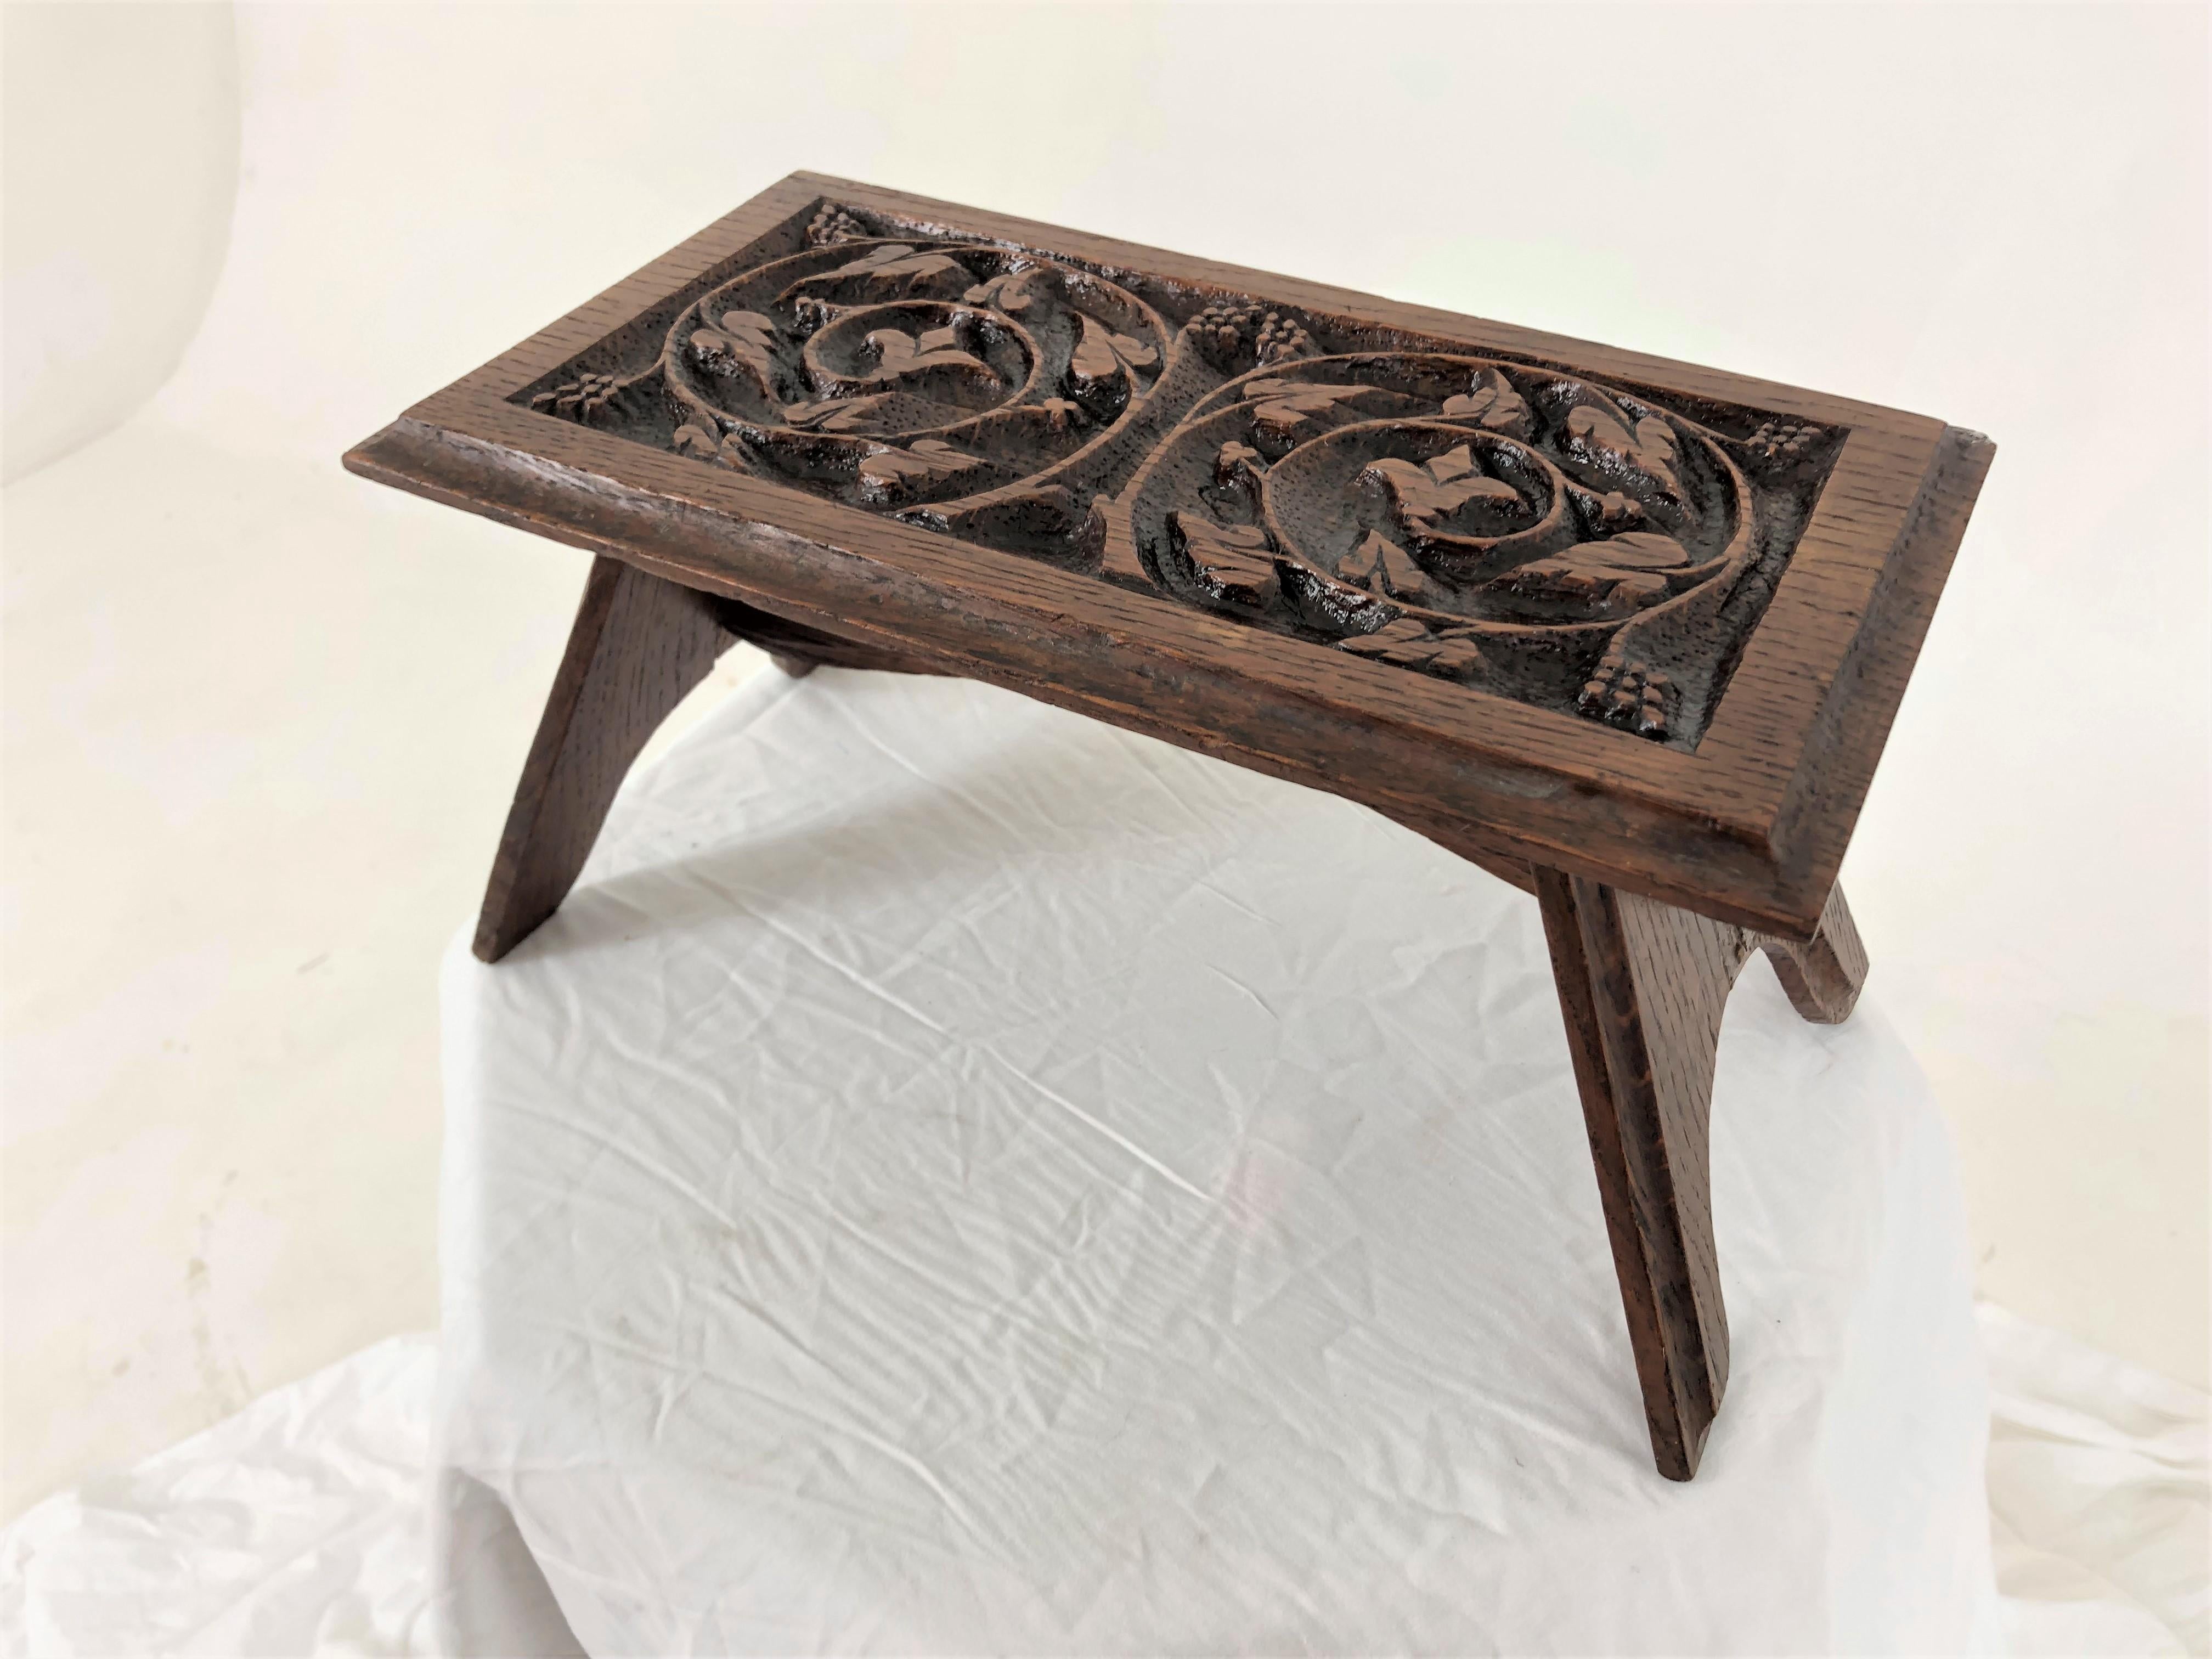 Scottish Antique Victorian Carved Oak Stool, Table, Art and Crafts, Scotland 1950, H832 For Sale